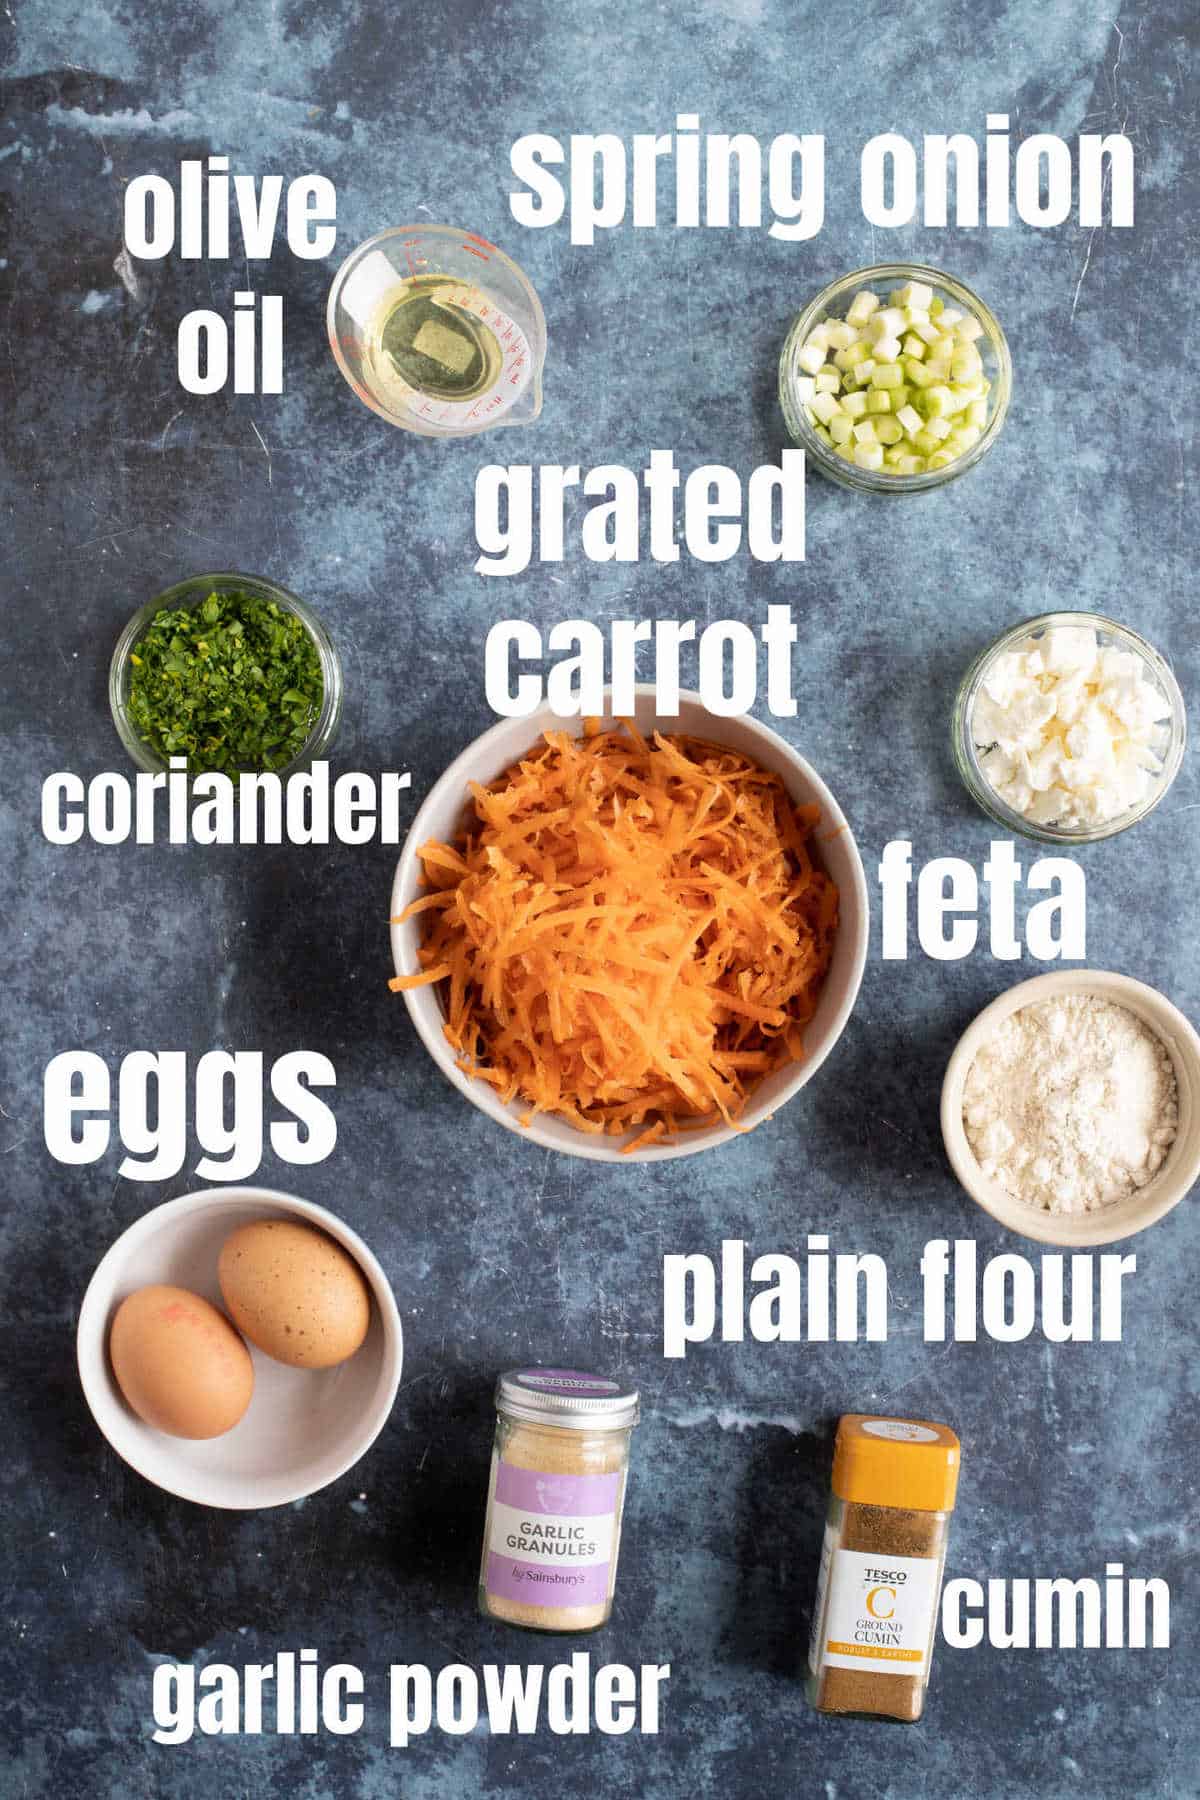 Ingredients for the carrot fritters